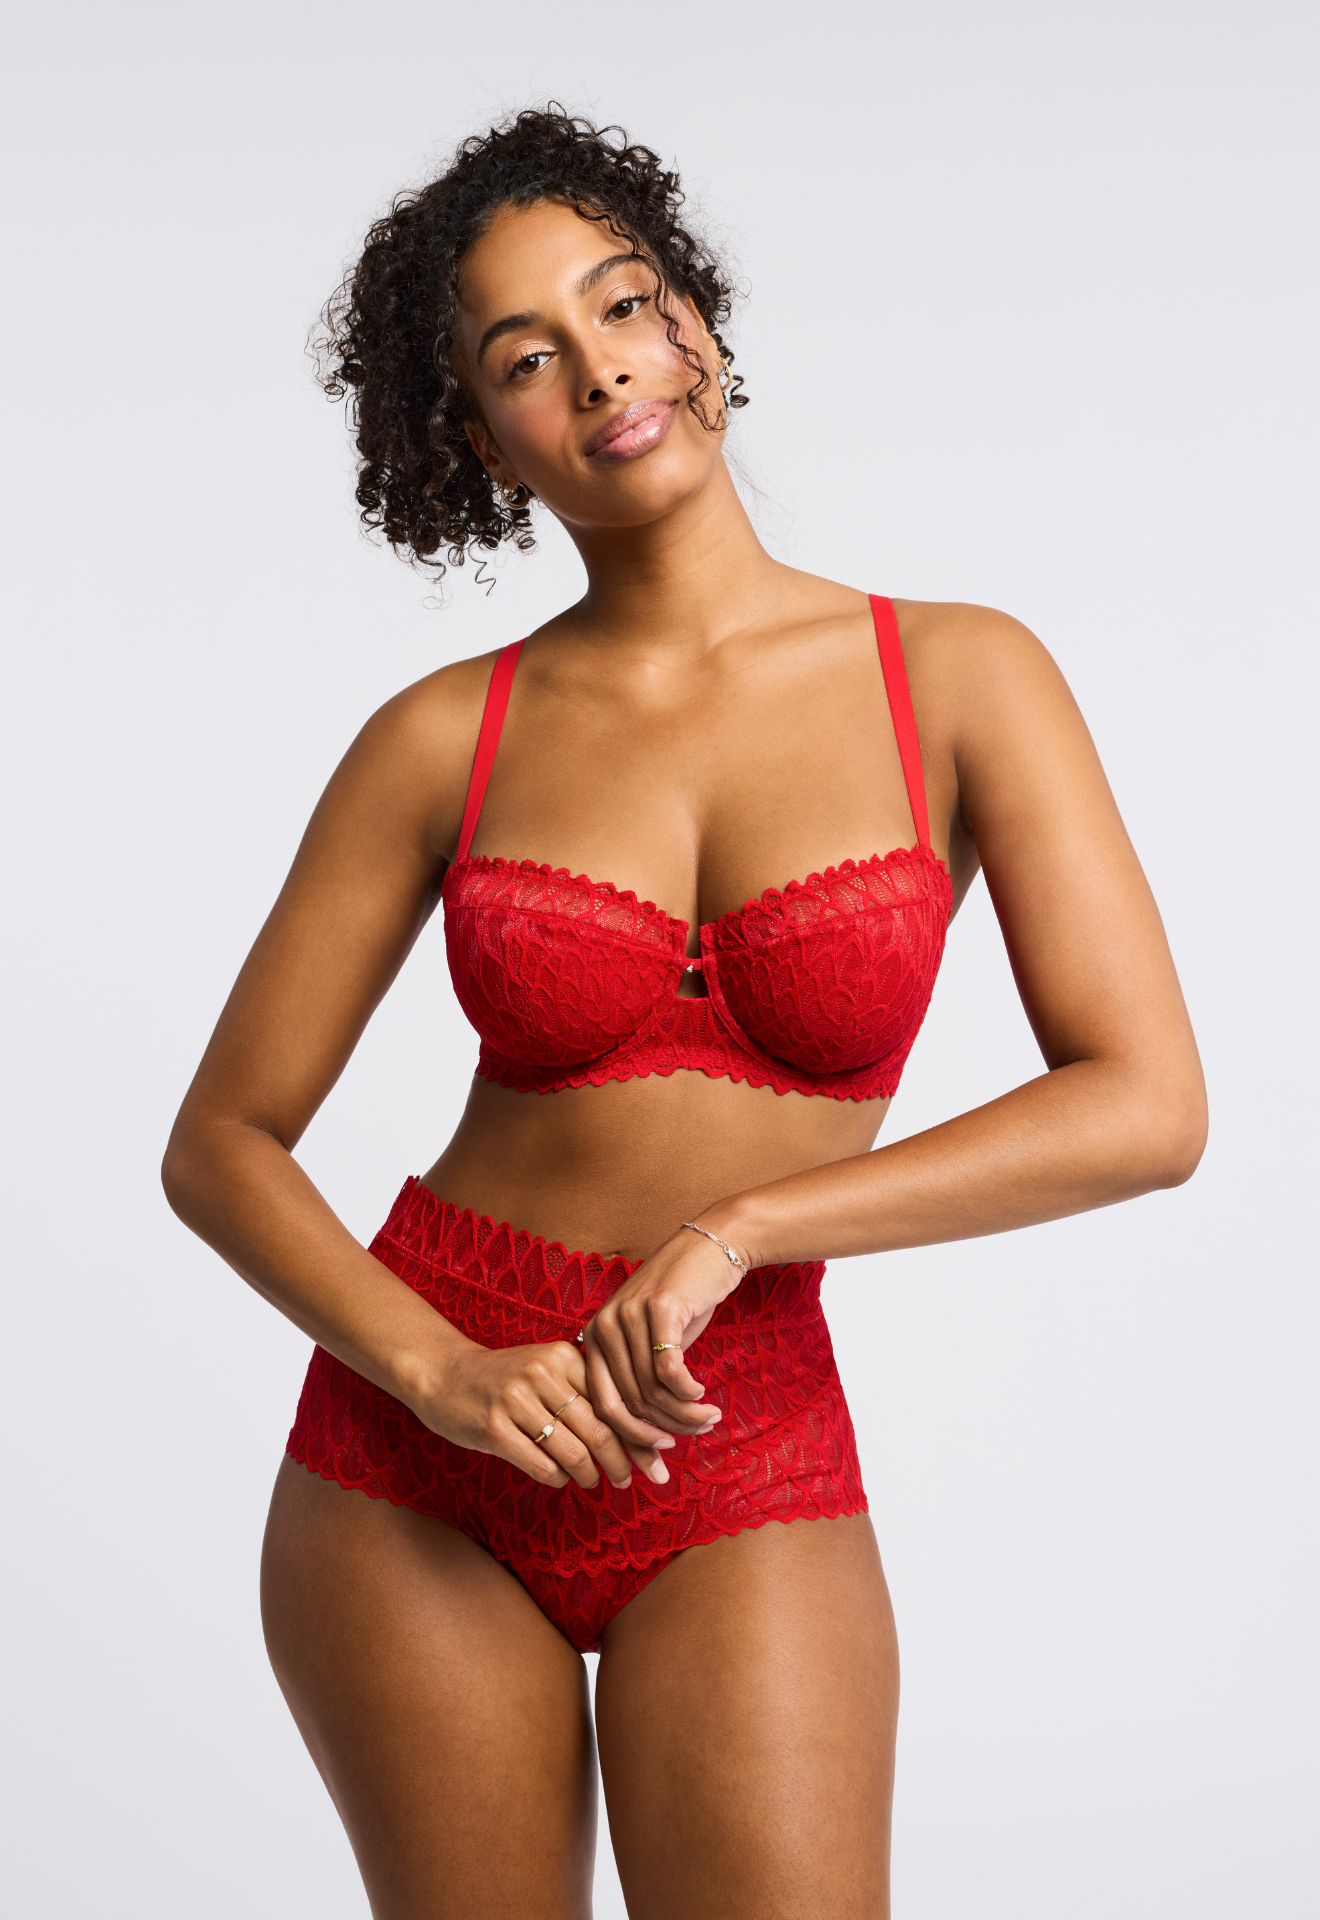 Lacy High Waist Brief - Sweet Red worn by model front view